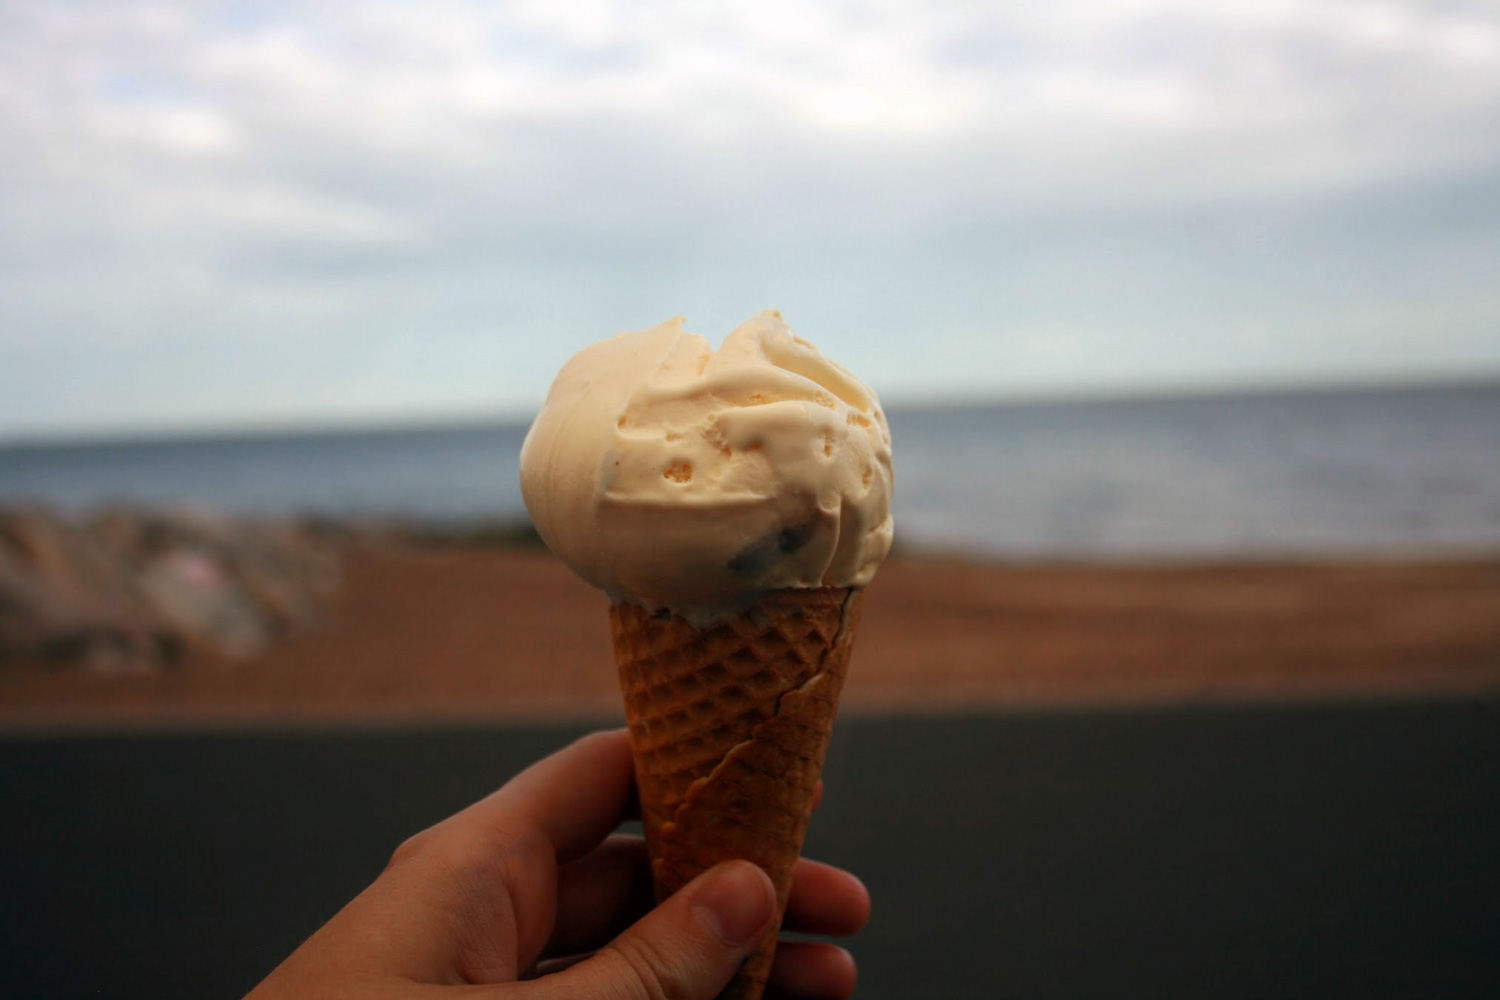 Someone holding a vanilla ice cream in the foreground, and in the background a beach.